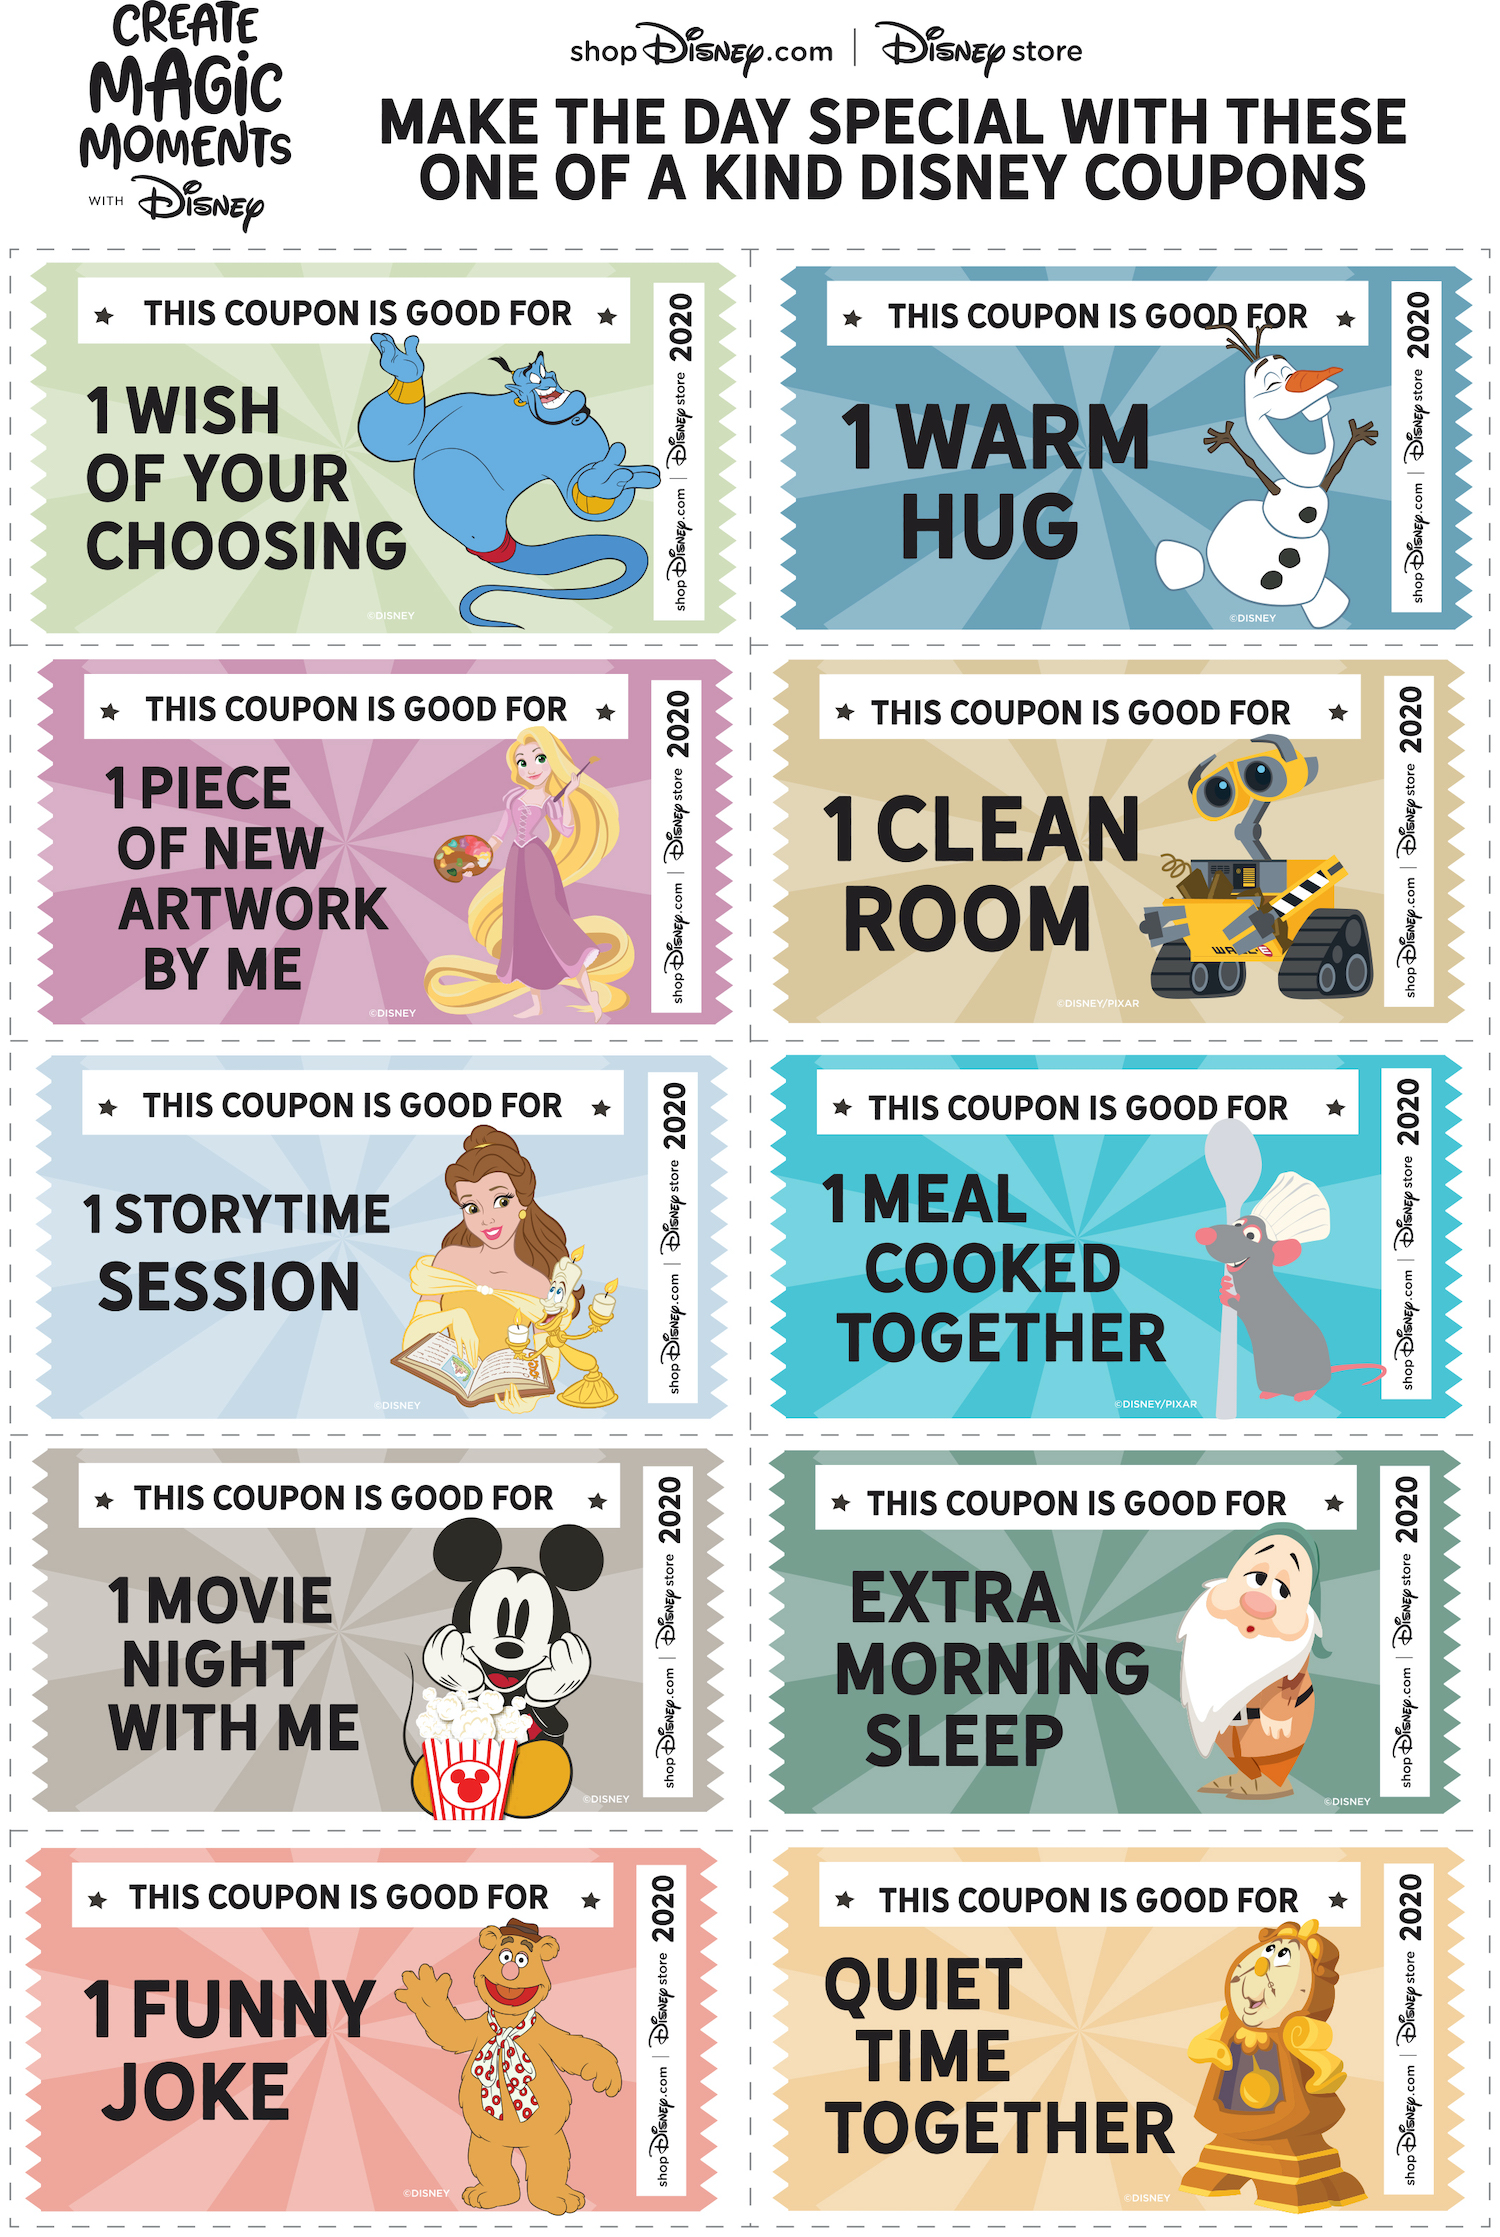 Cash in on the Mother's Day Fun with Disney's New Coupons